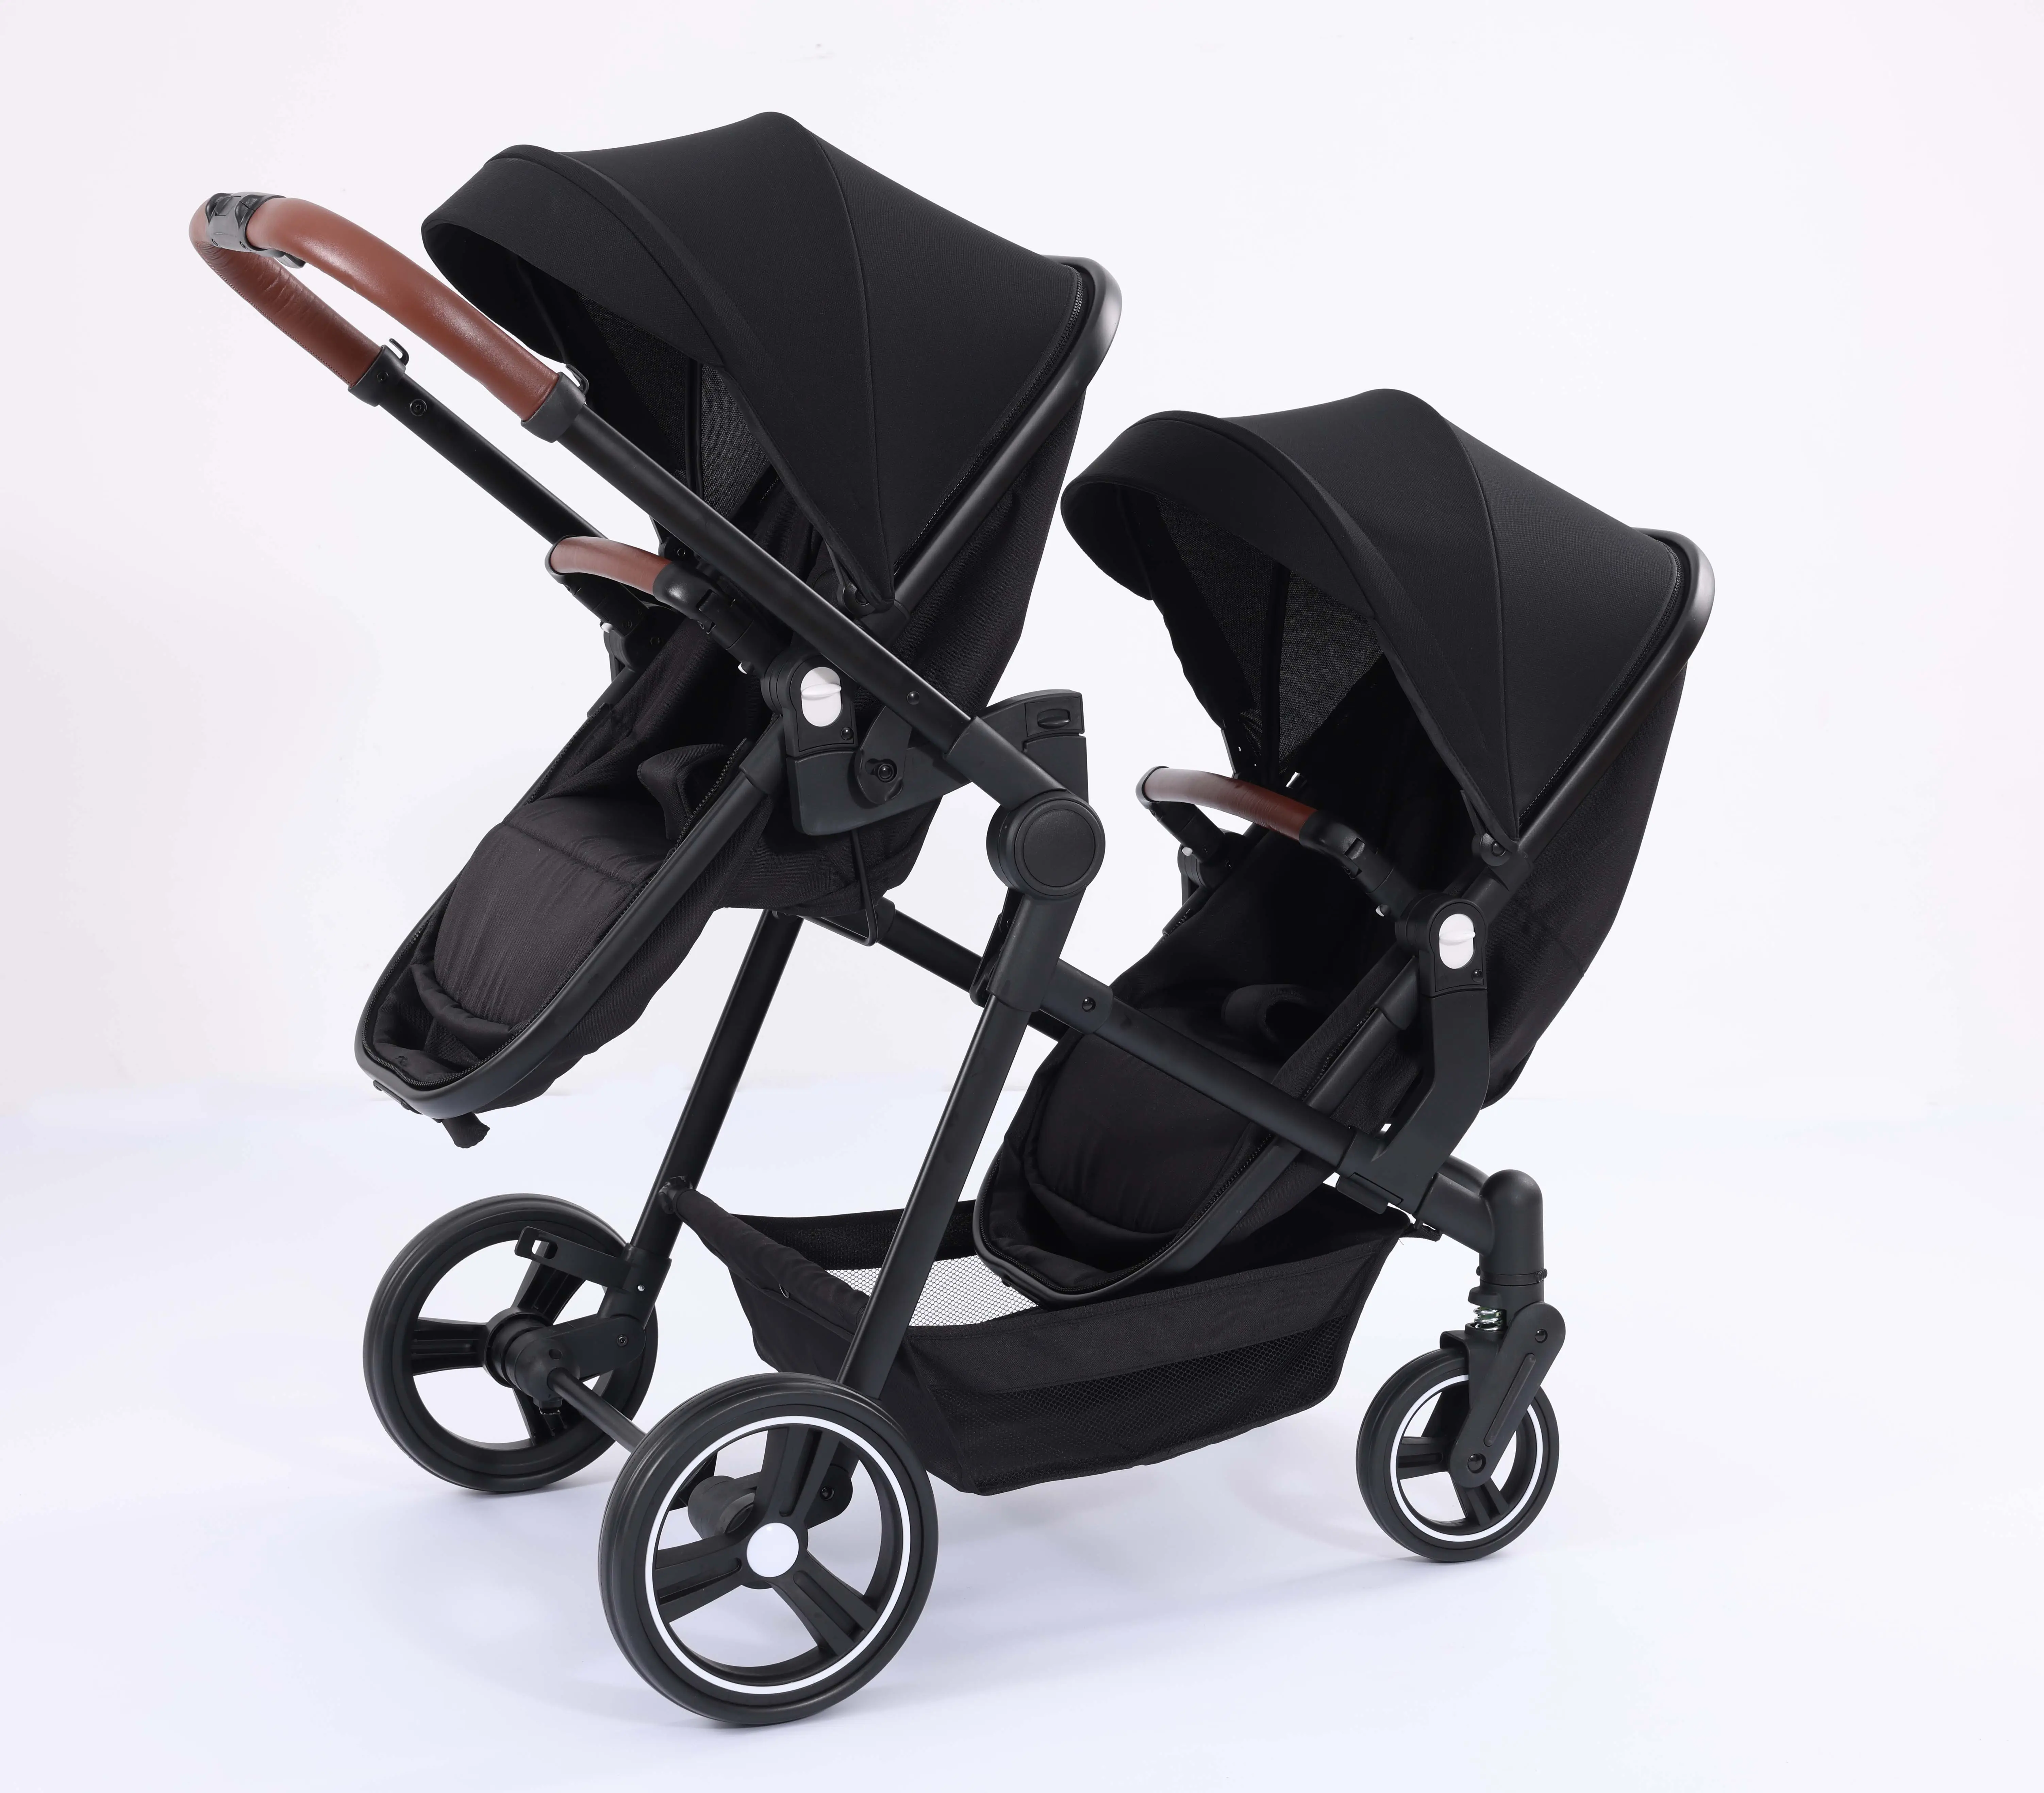 2022 New Design Wholesale 3 In 1 Folding Detachable Double Baby Pram Twin Stroller For 0-3 Years Old Babies For Travel Outdoor